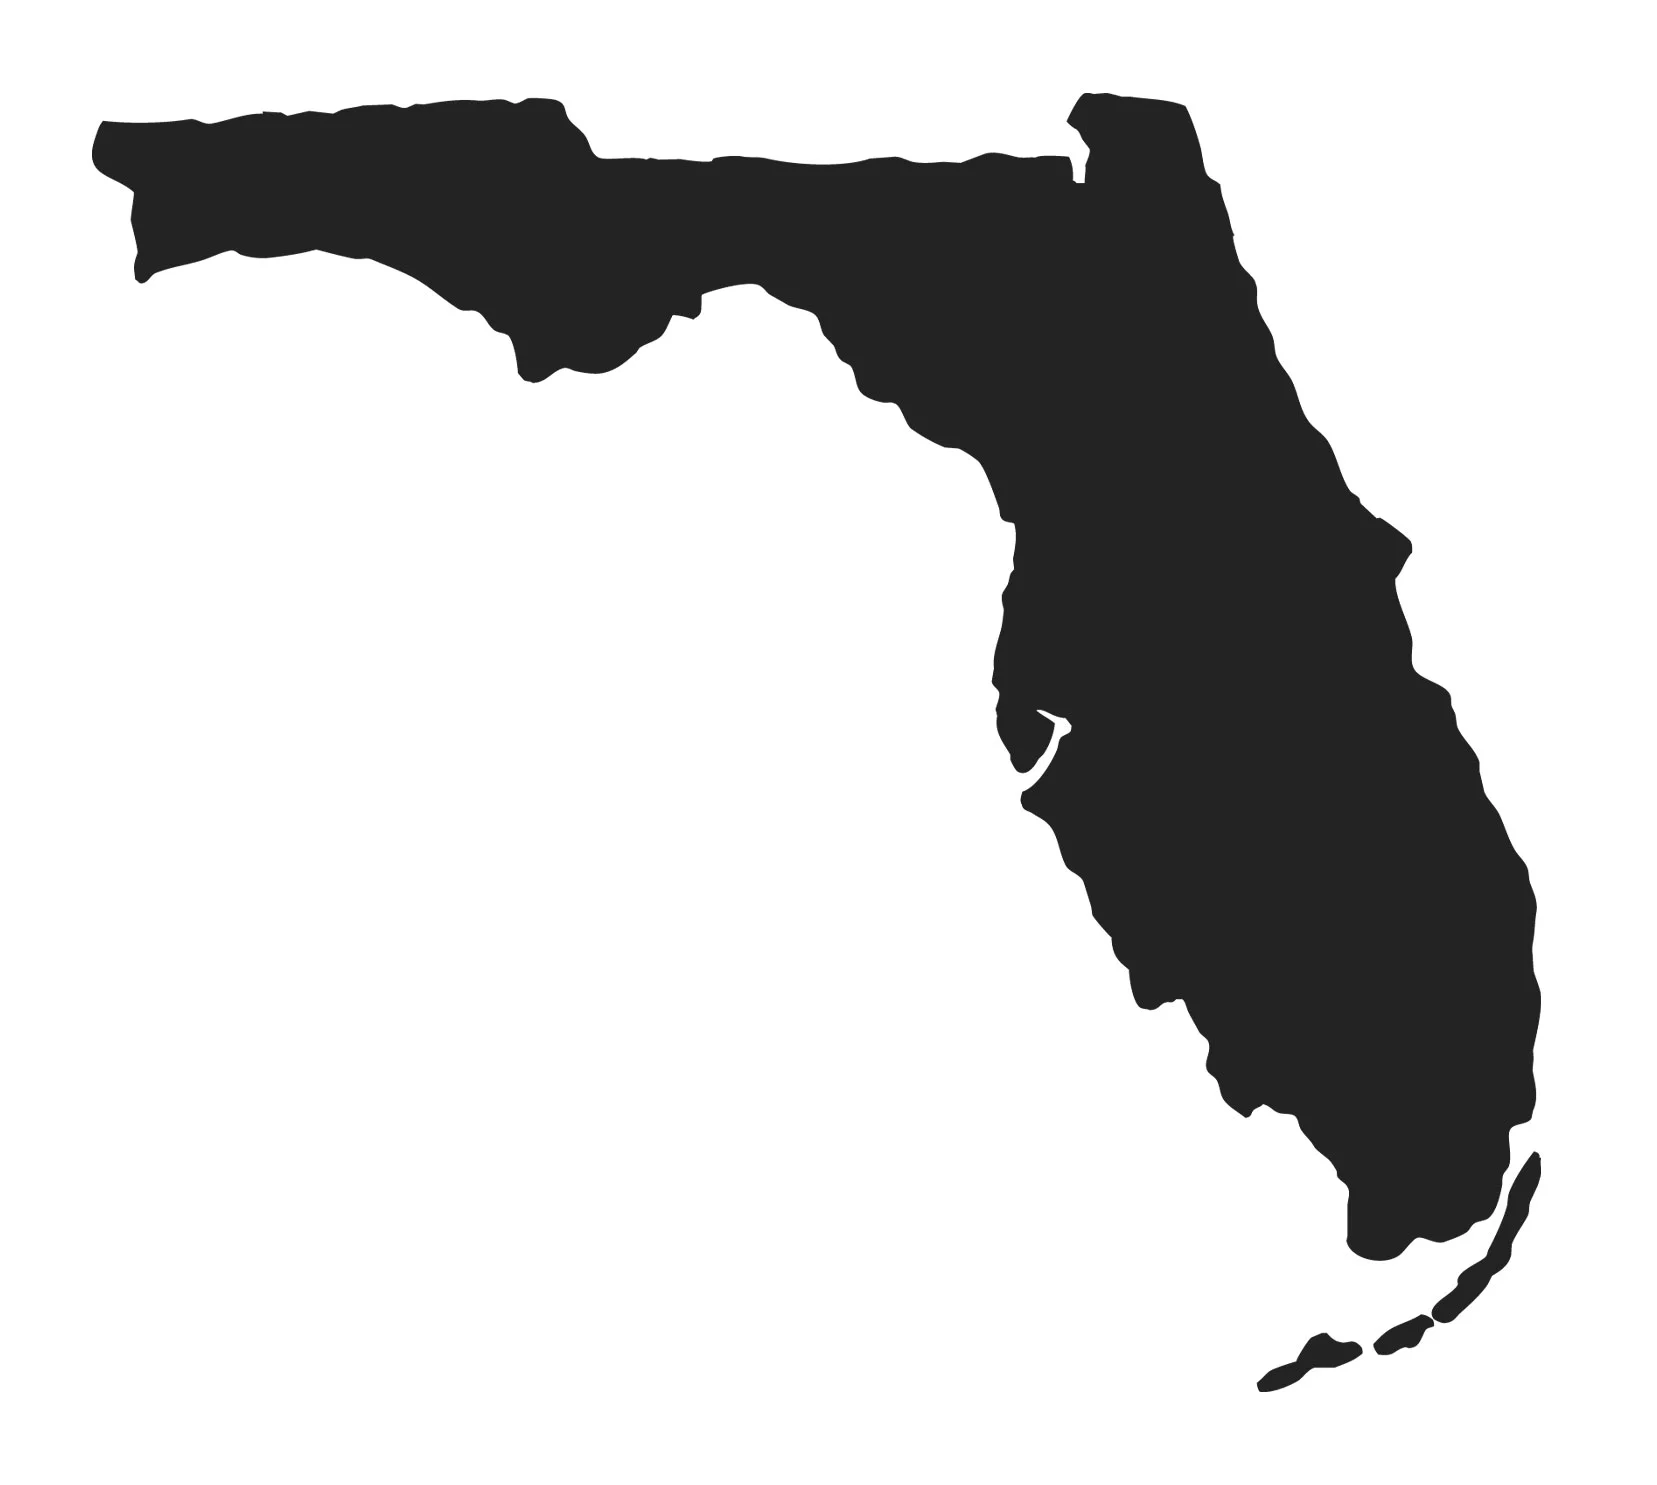 services offered throughout Florida